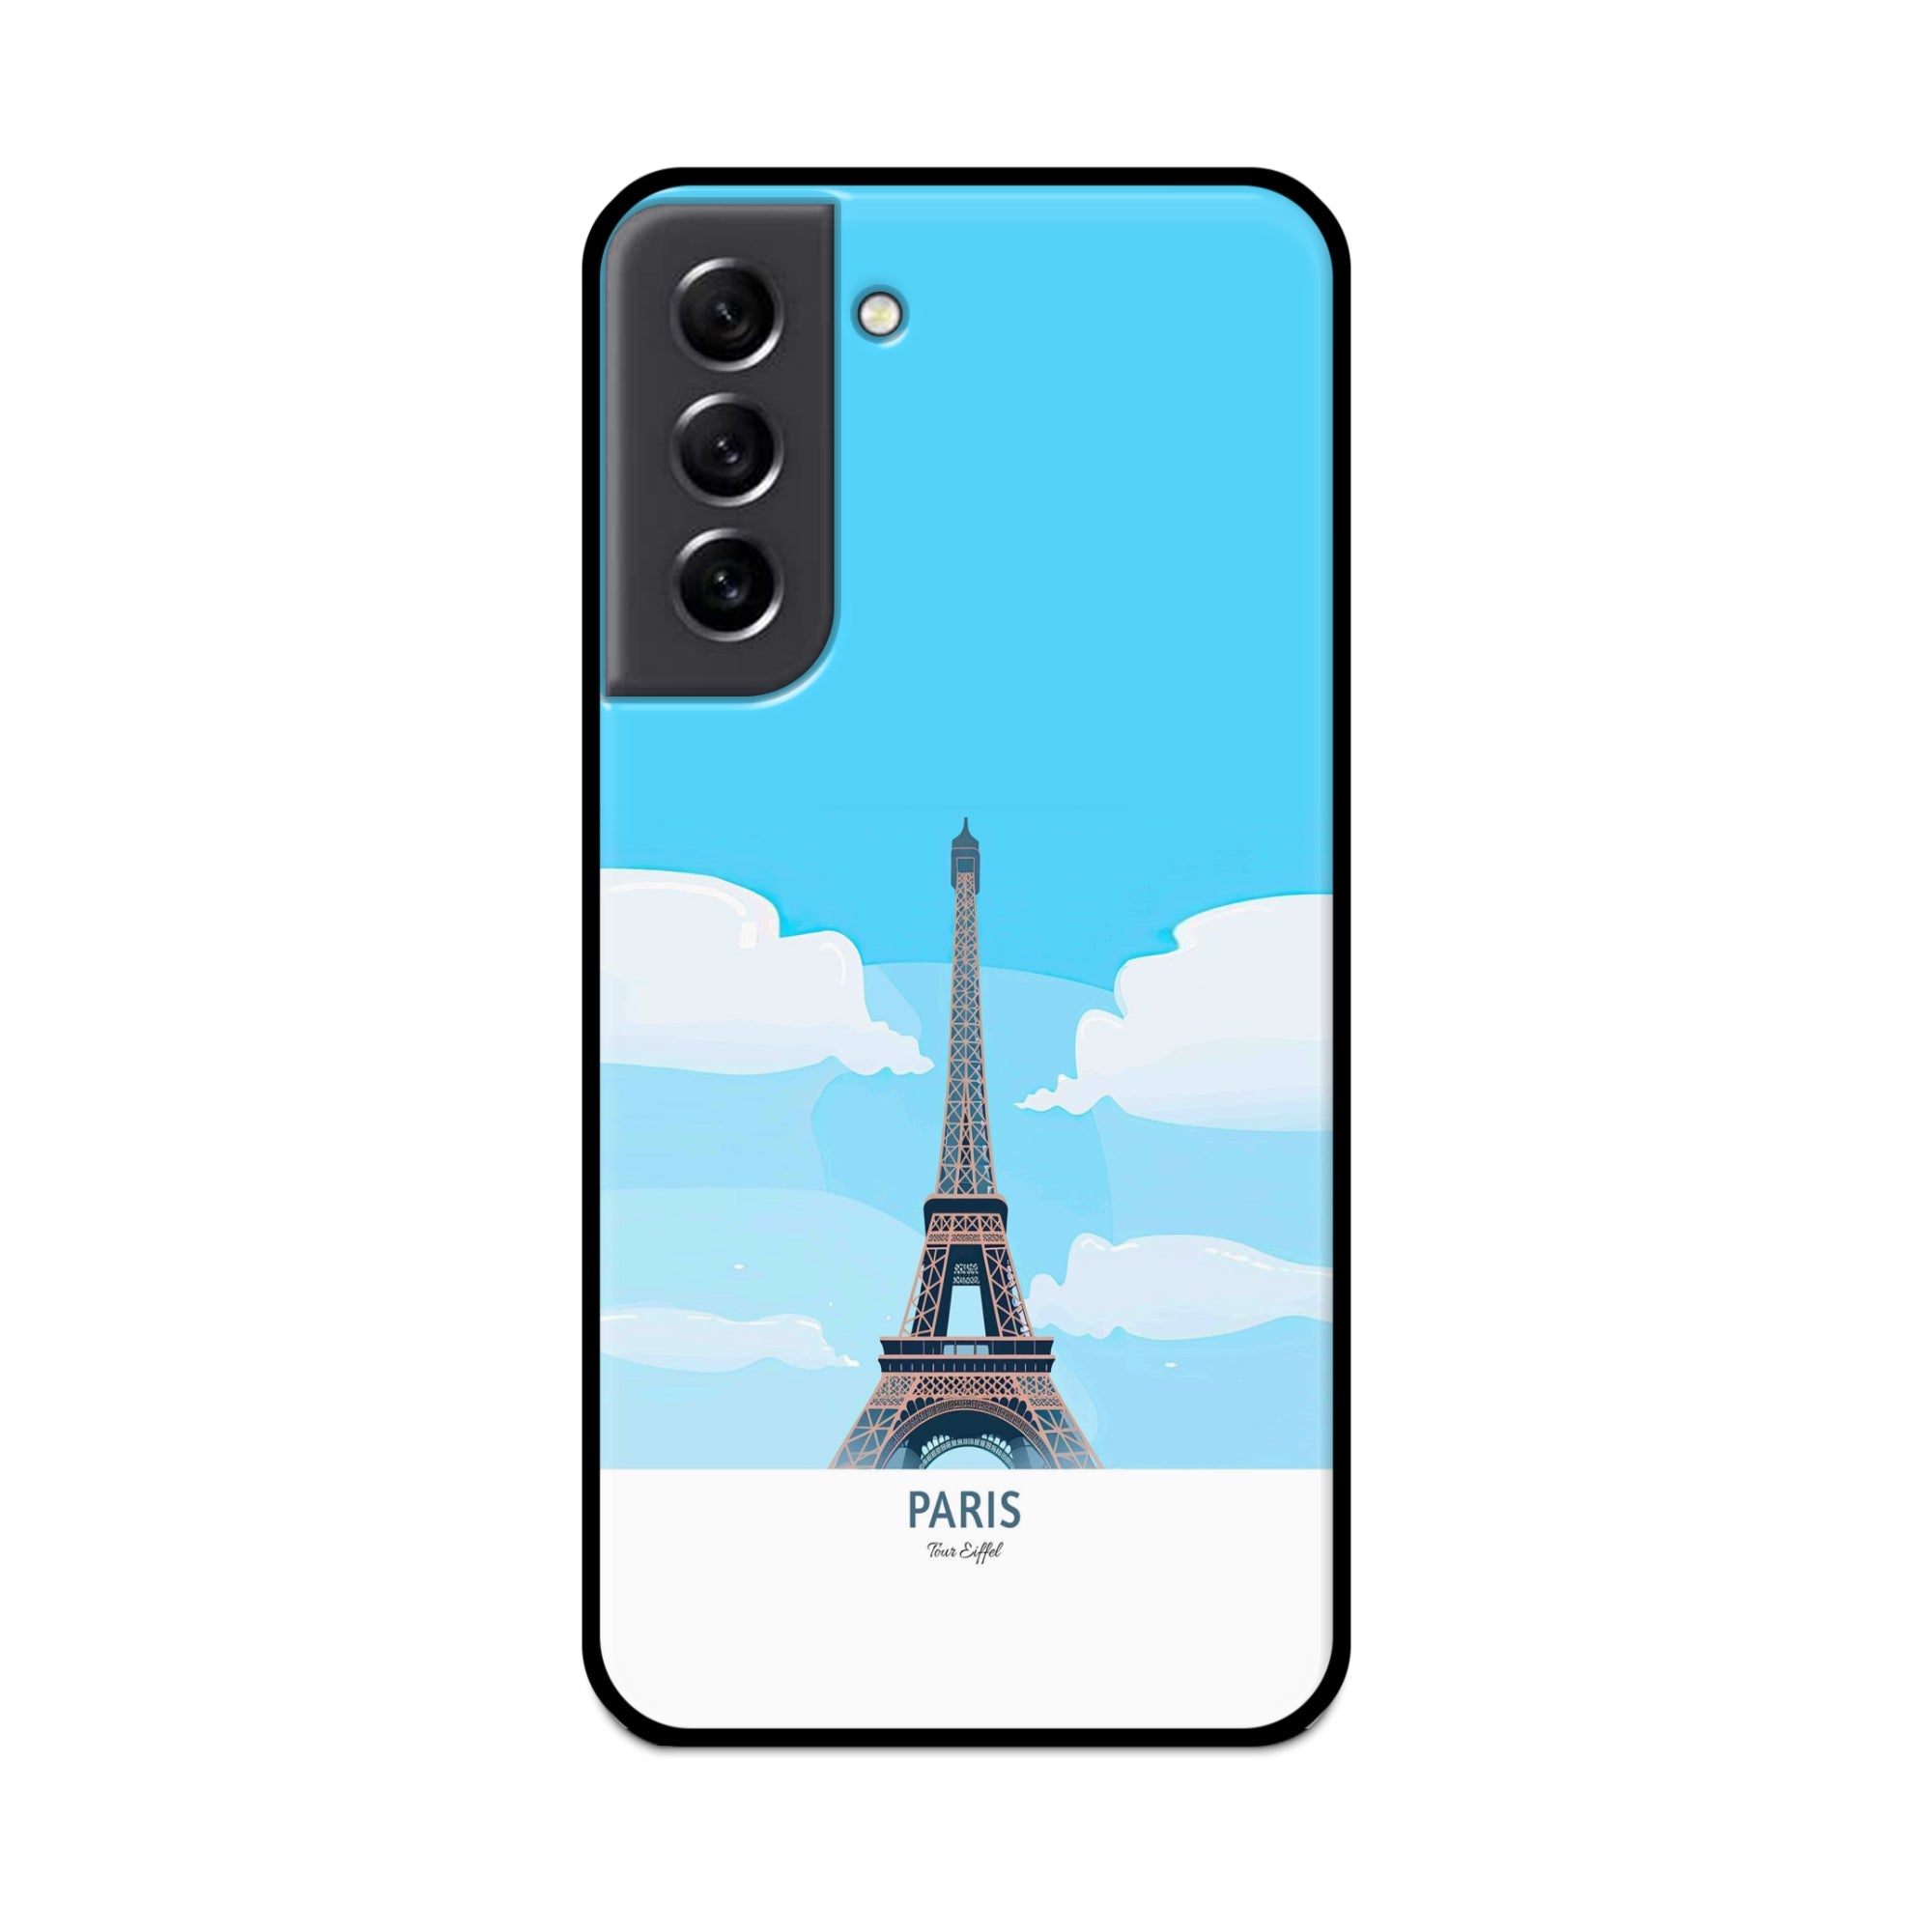 Buy Paris Metal-Silicon Back Mobile Phone Case/Cover For Samsung S21 FE Online